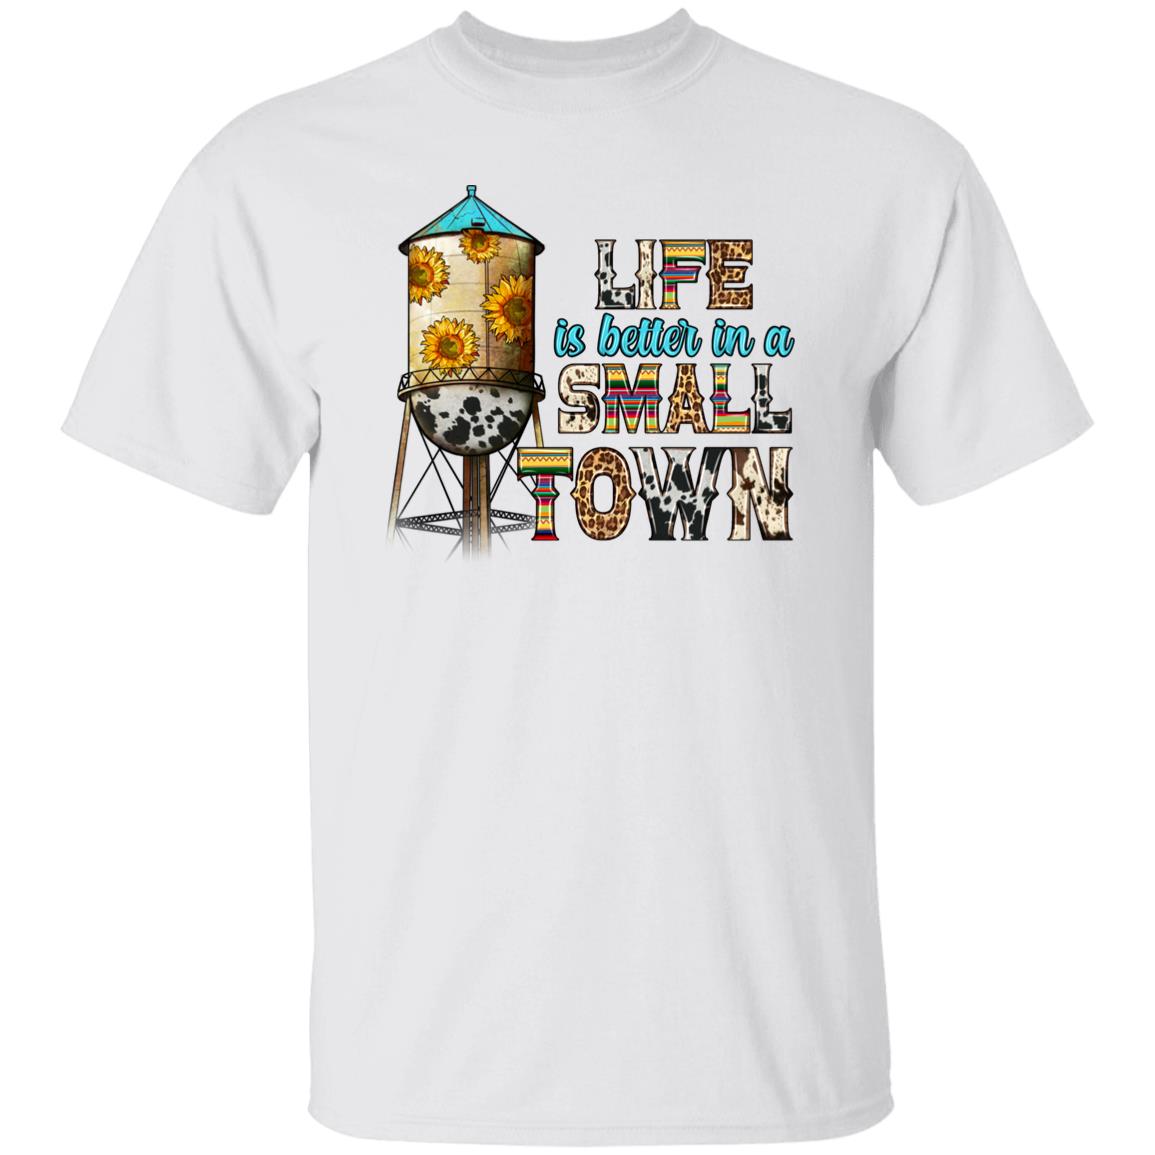 Life is better in a small town T-Shirt gift Western sunflowers small town girl Unisex Tee Sand White Sport Grey-Family-Gift-Planet